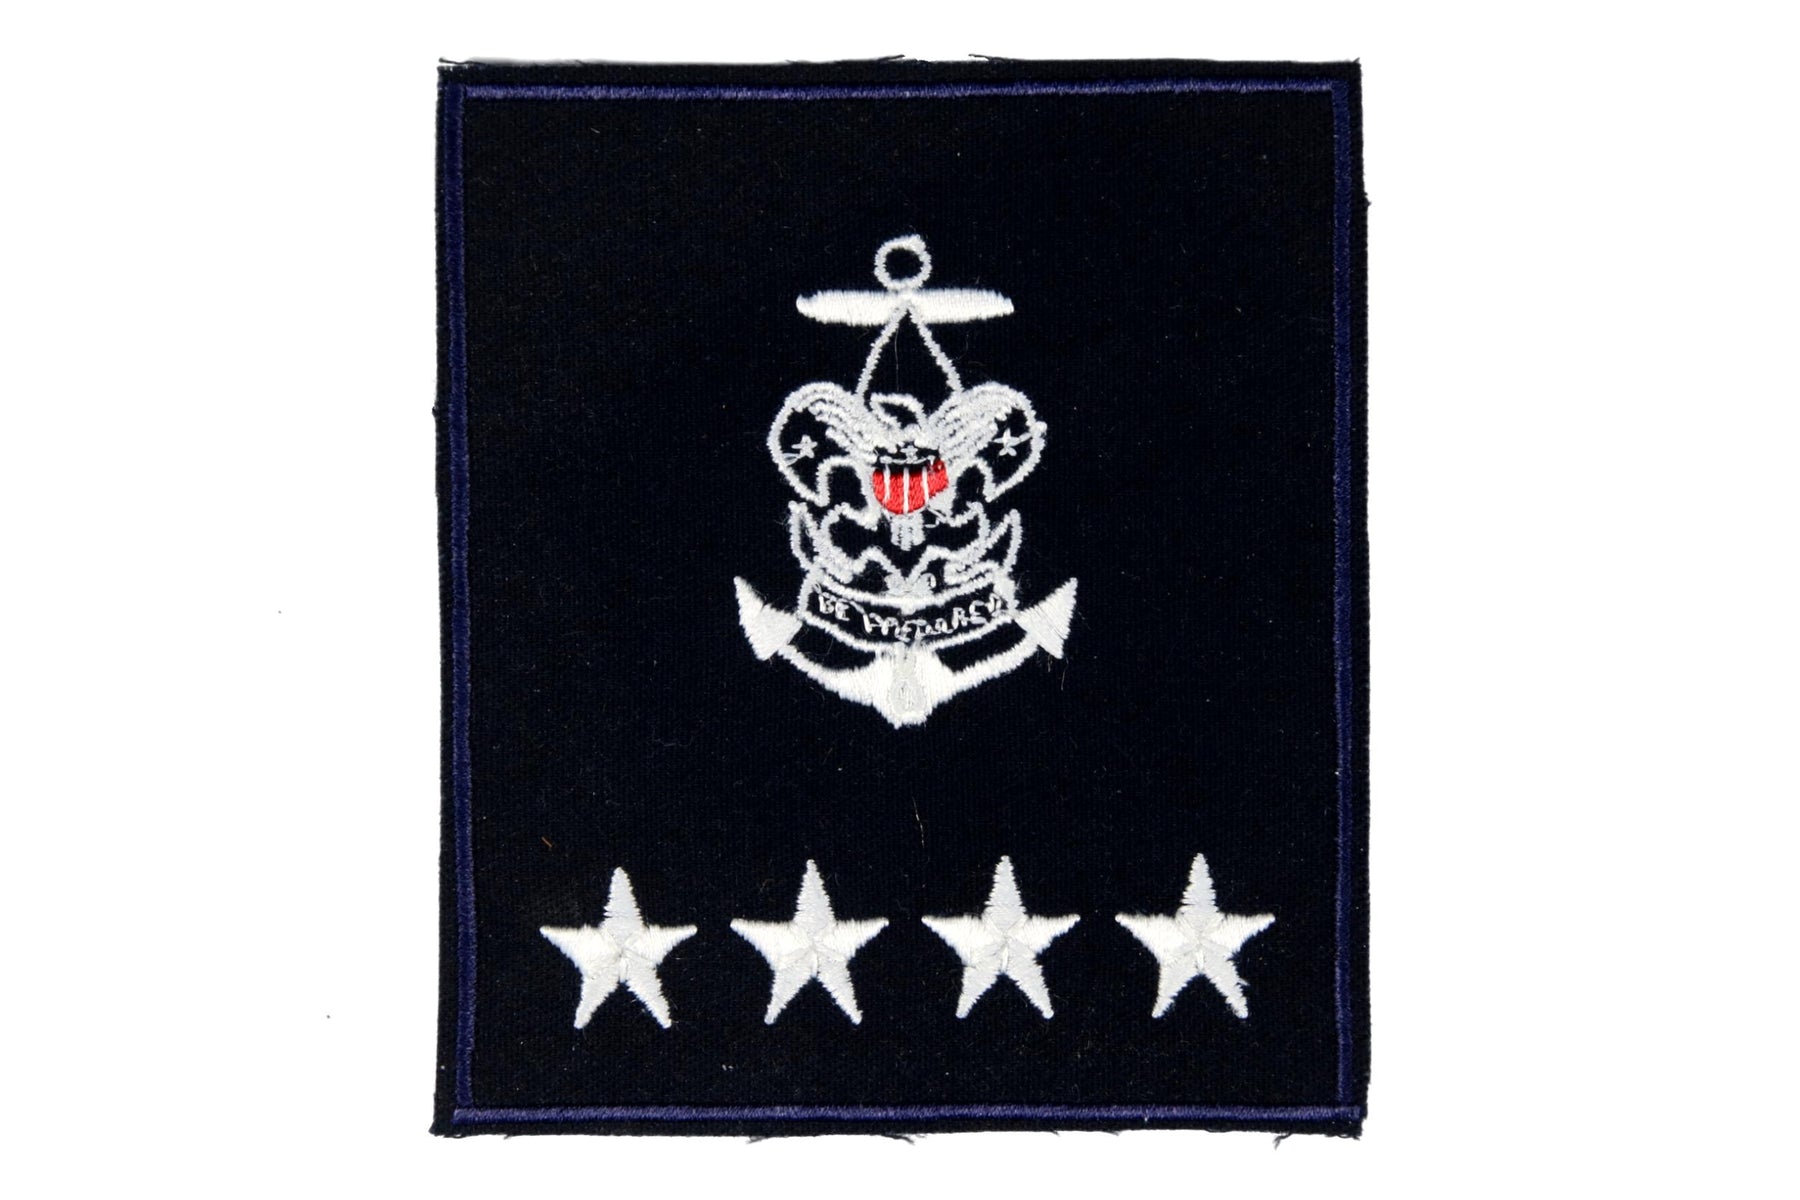 Sea Scout National Professional Staff Patch on Blue Plastic Back